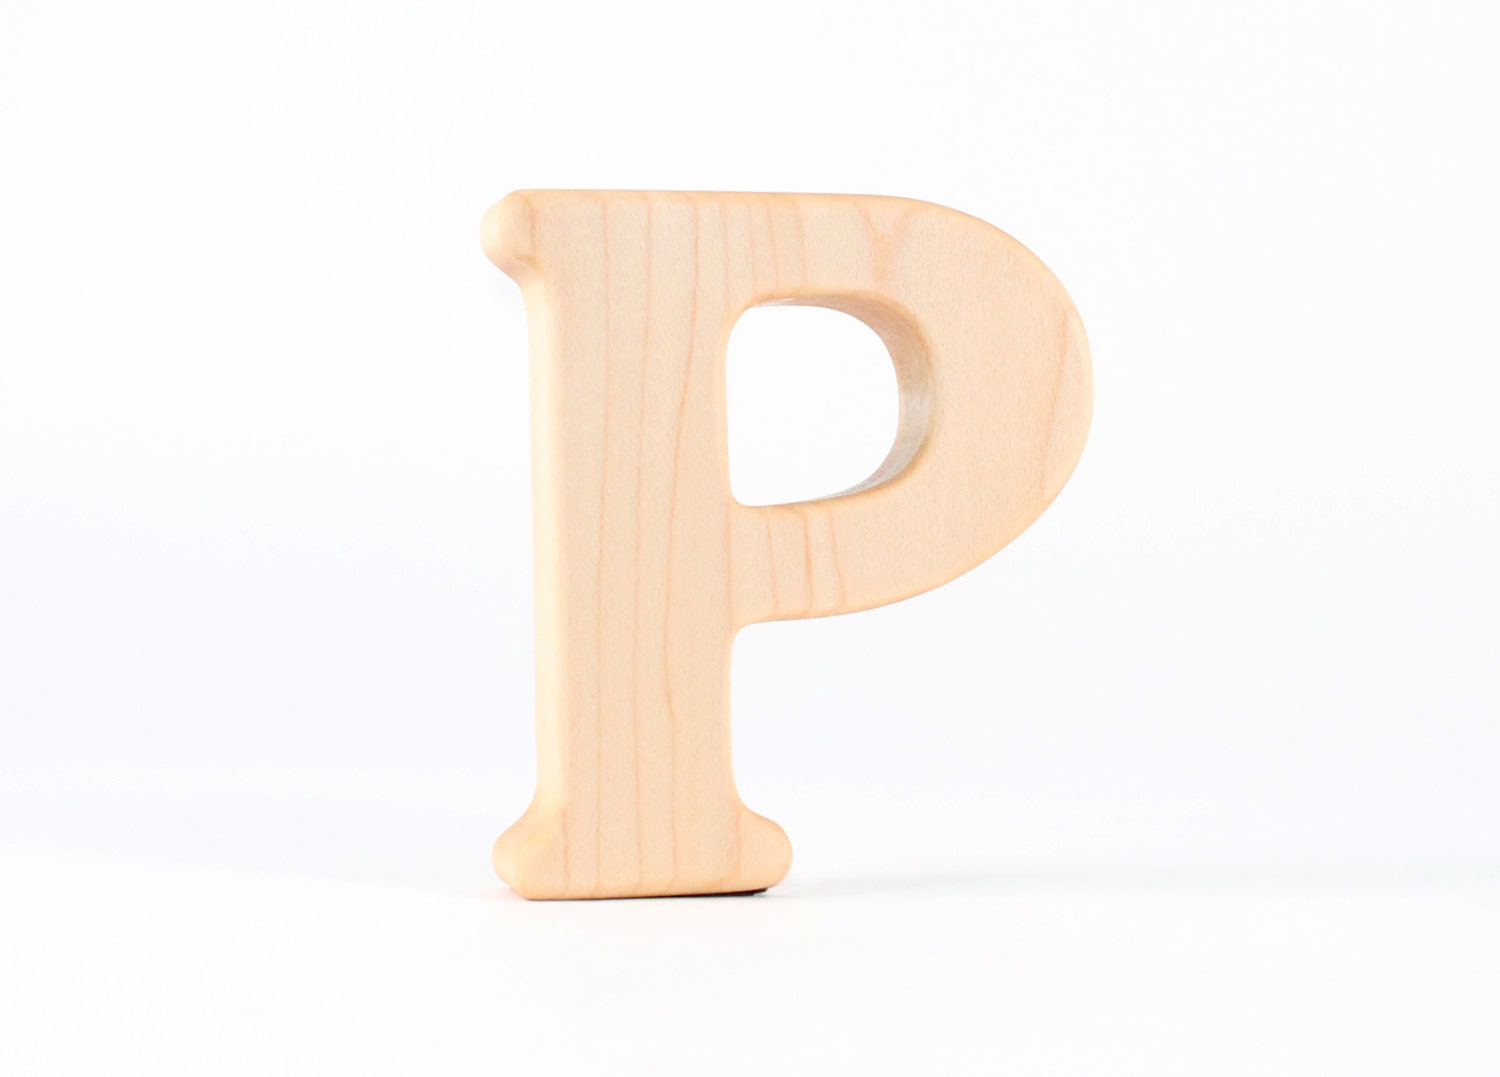 letter P wood teether - a keepsake new baby gift for infants and parents, handmade and safe hardwood teething / grasping toy - SmilingTreeToys